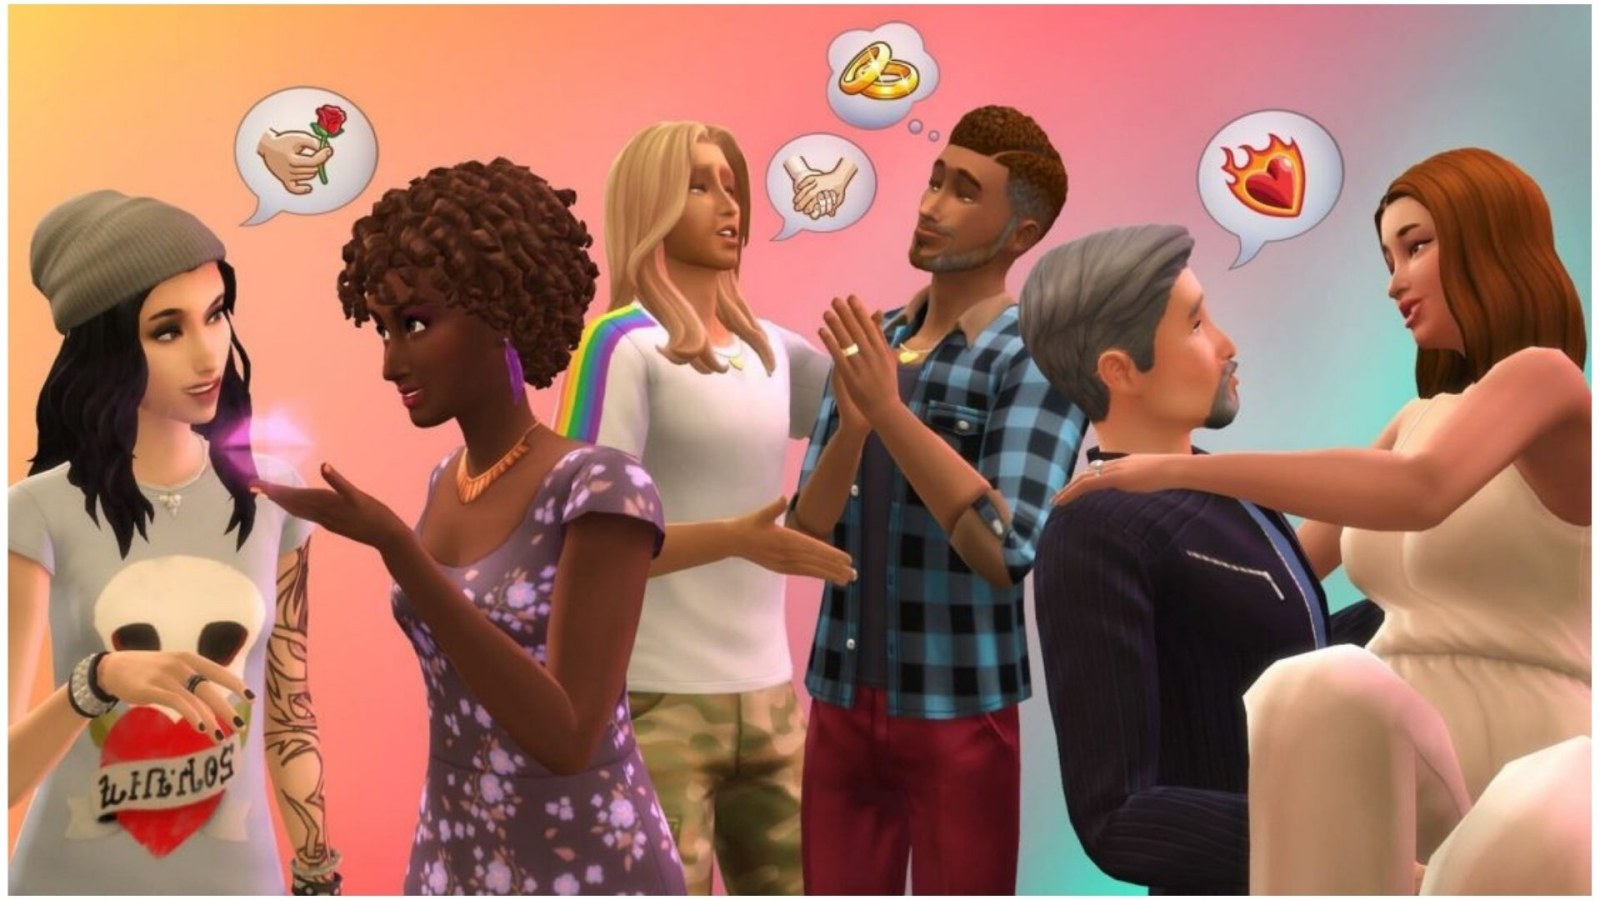 The Sims 4 cheats: all the life hacks you need